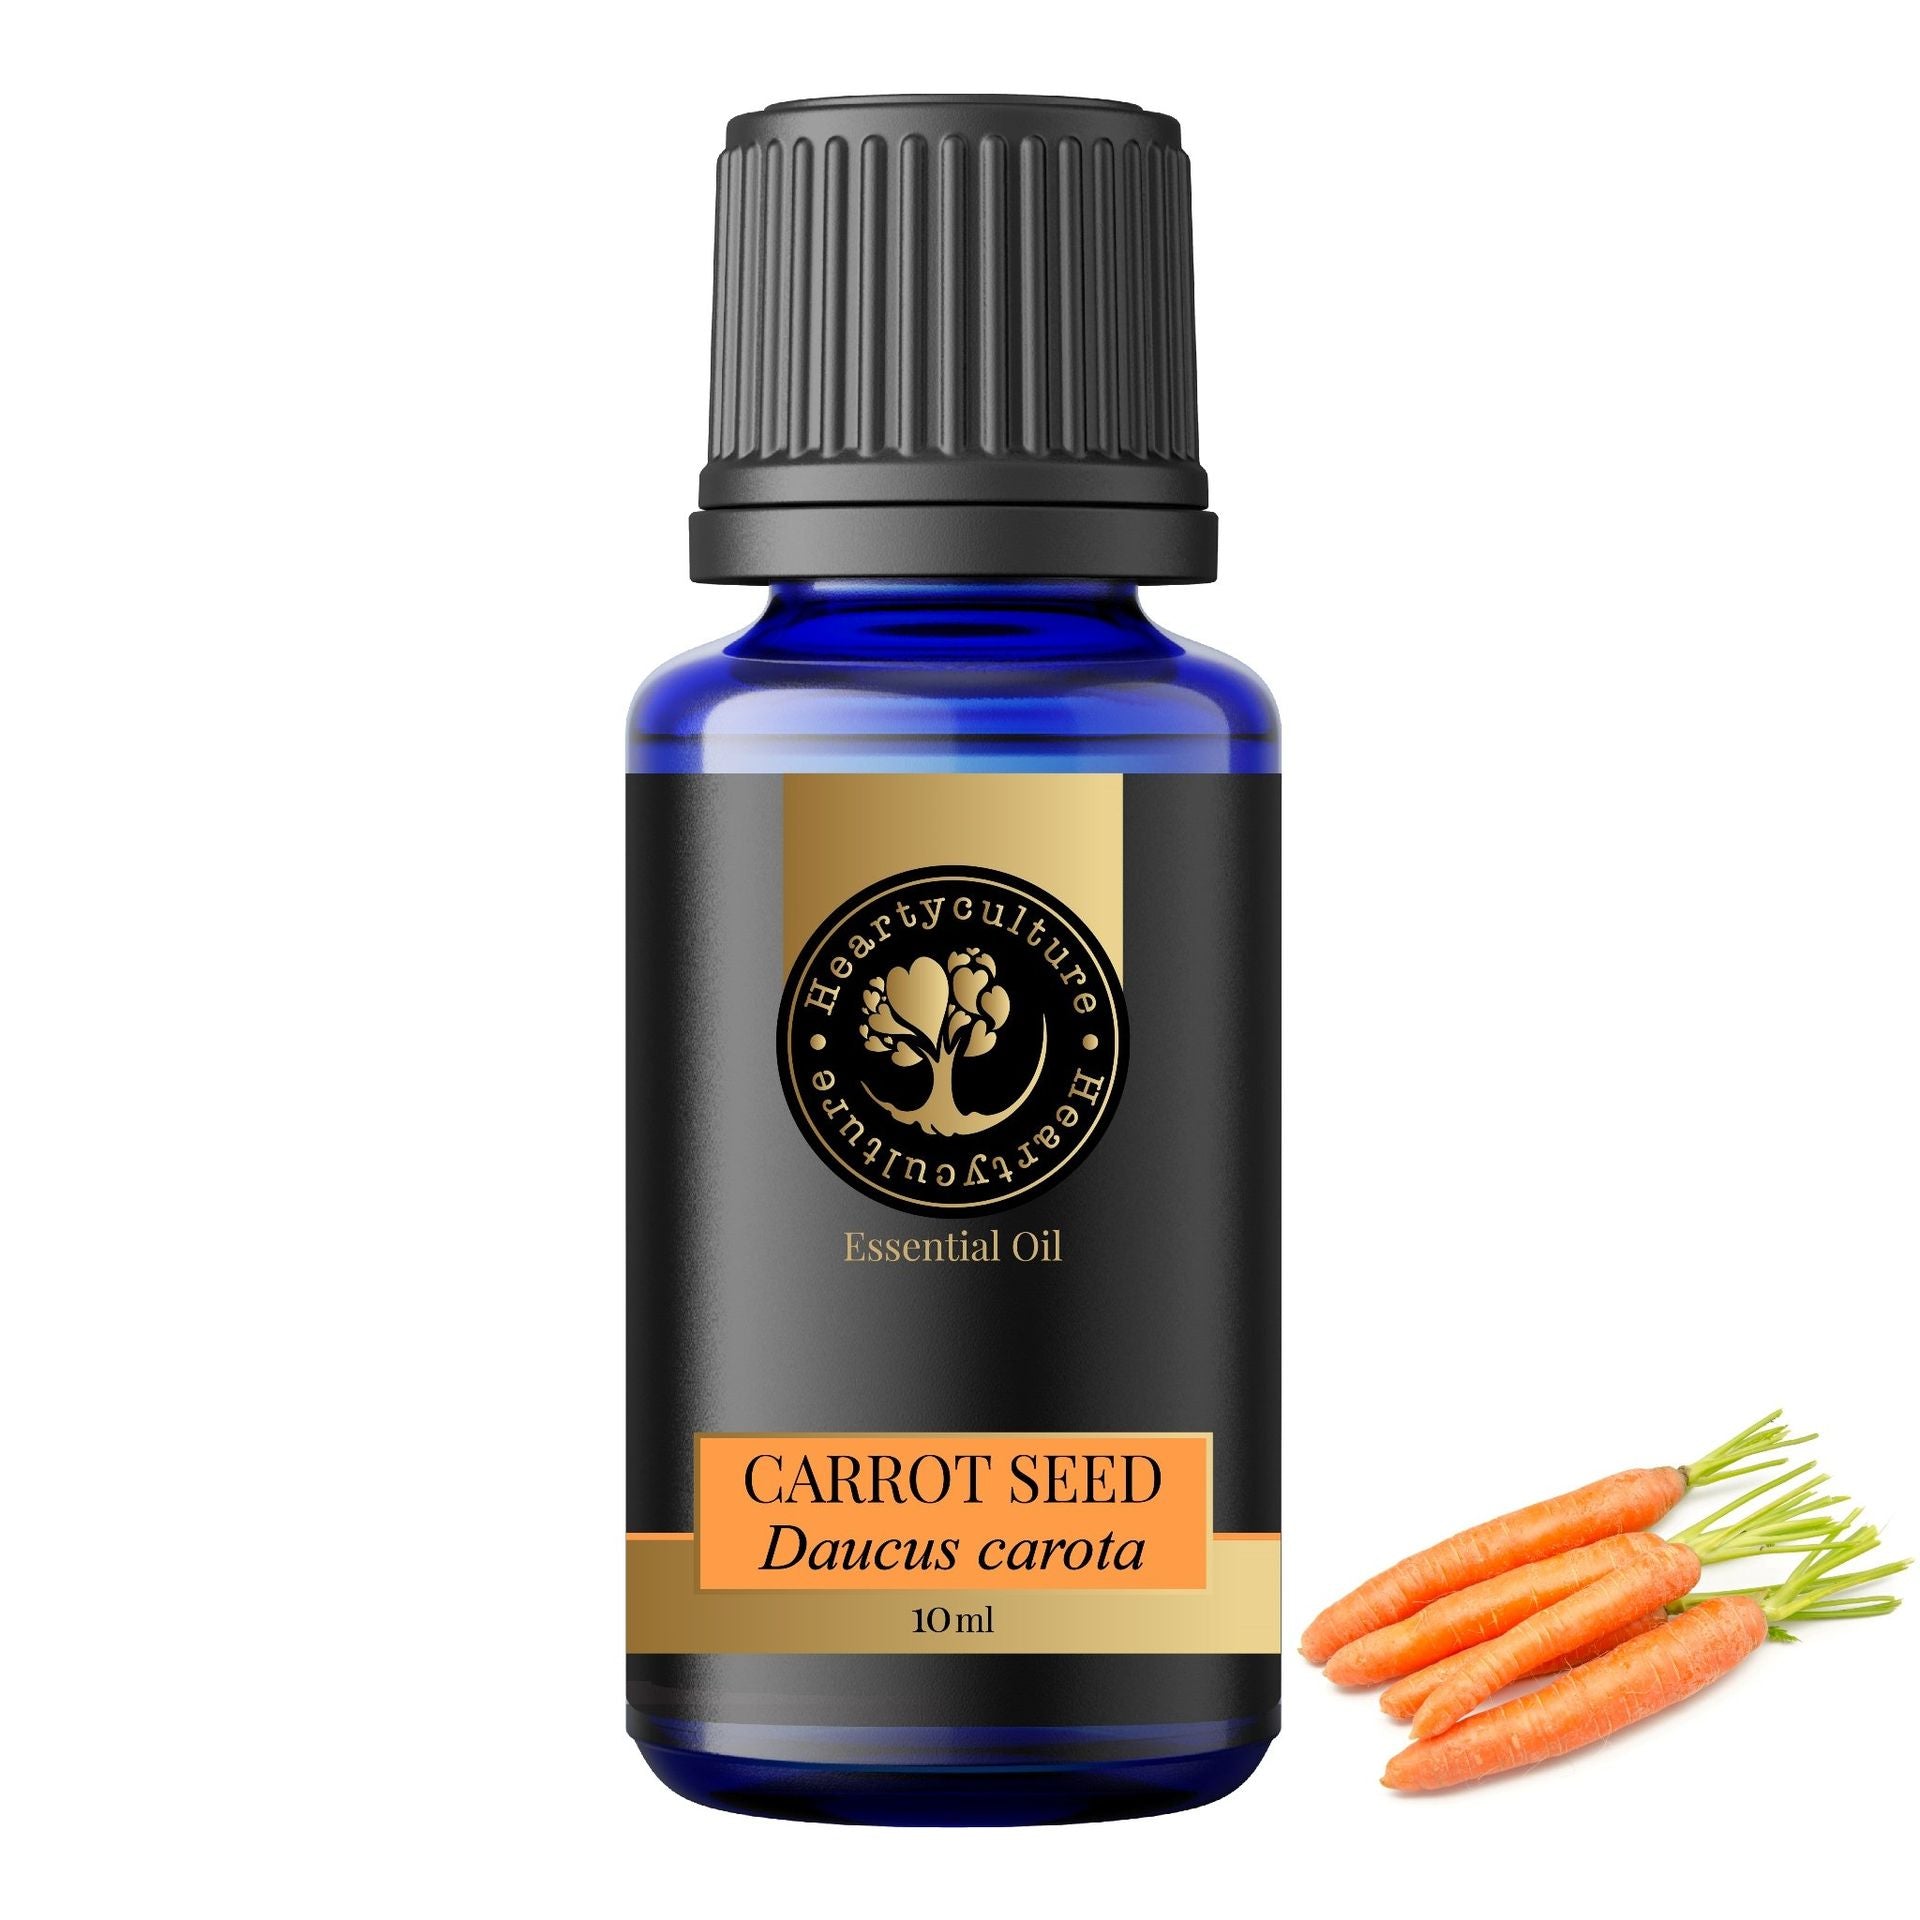 Heartyculture Carrot Seed Essential Oil - 10 ml - hfnl!fe